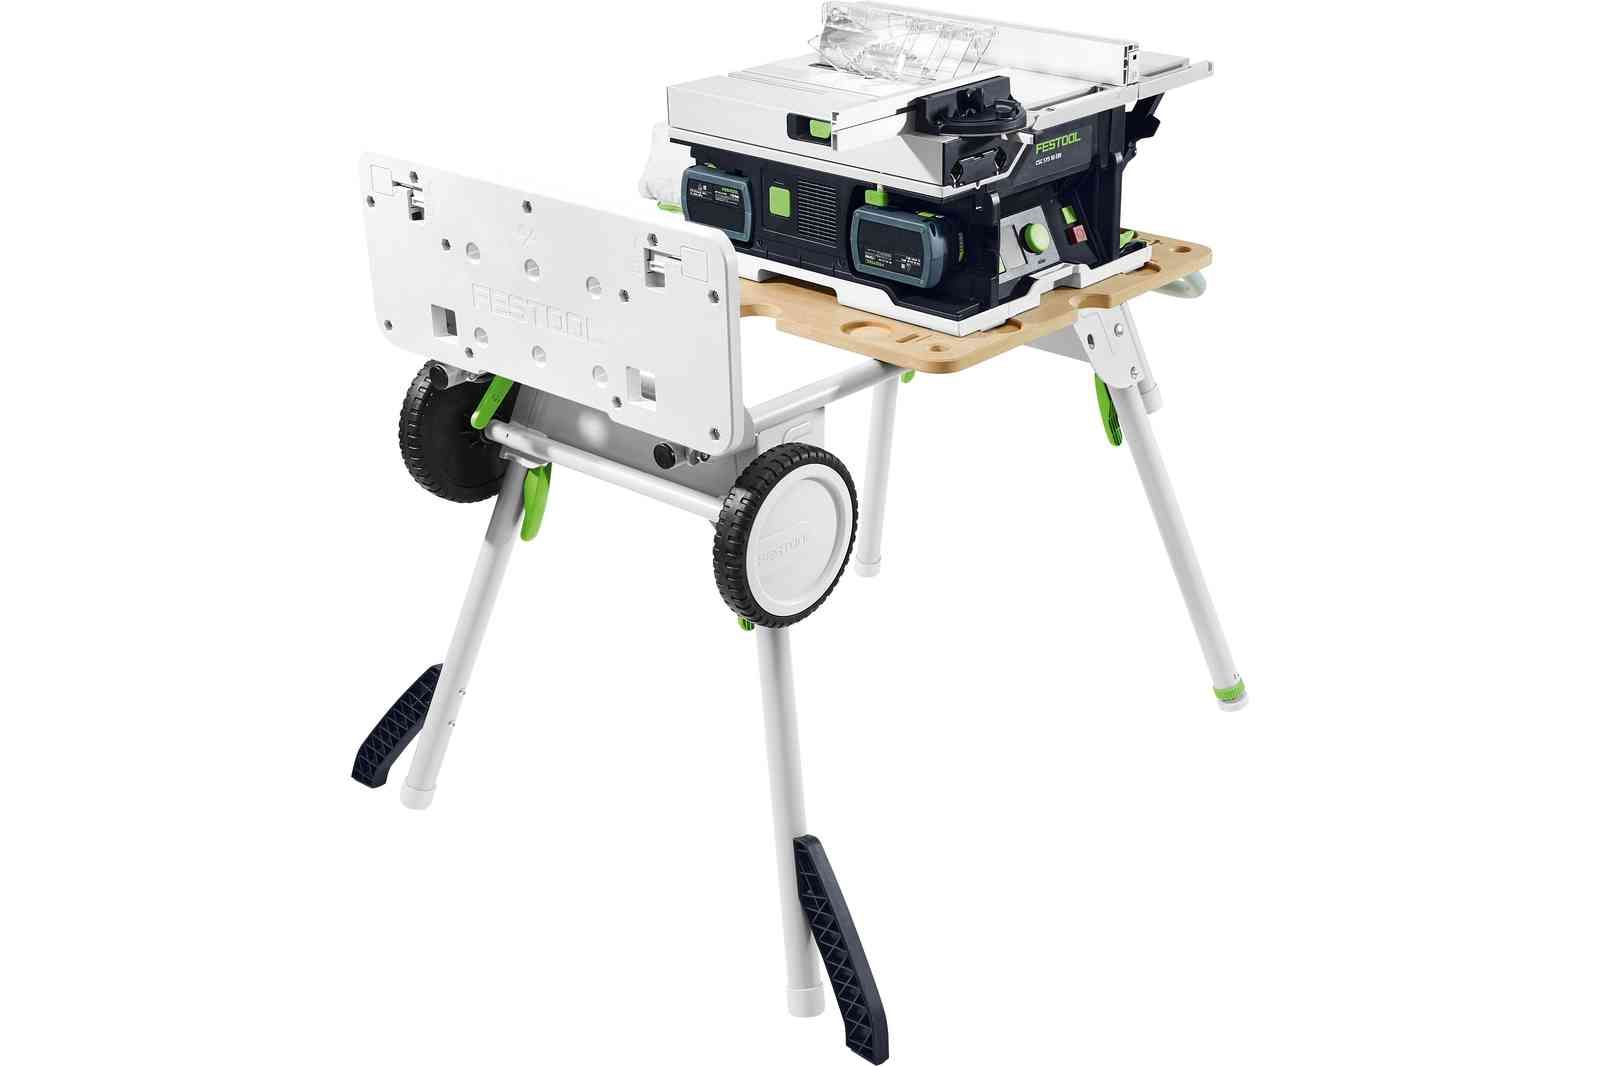 CSC SYS 50 18V Cordless 168mm Systainer Saw 5.2Ah Bluetooth Set & Underframe 577381 by Festool